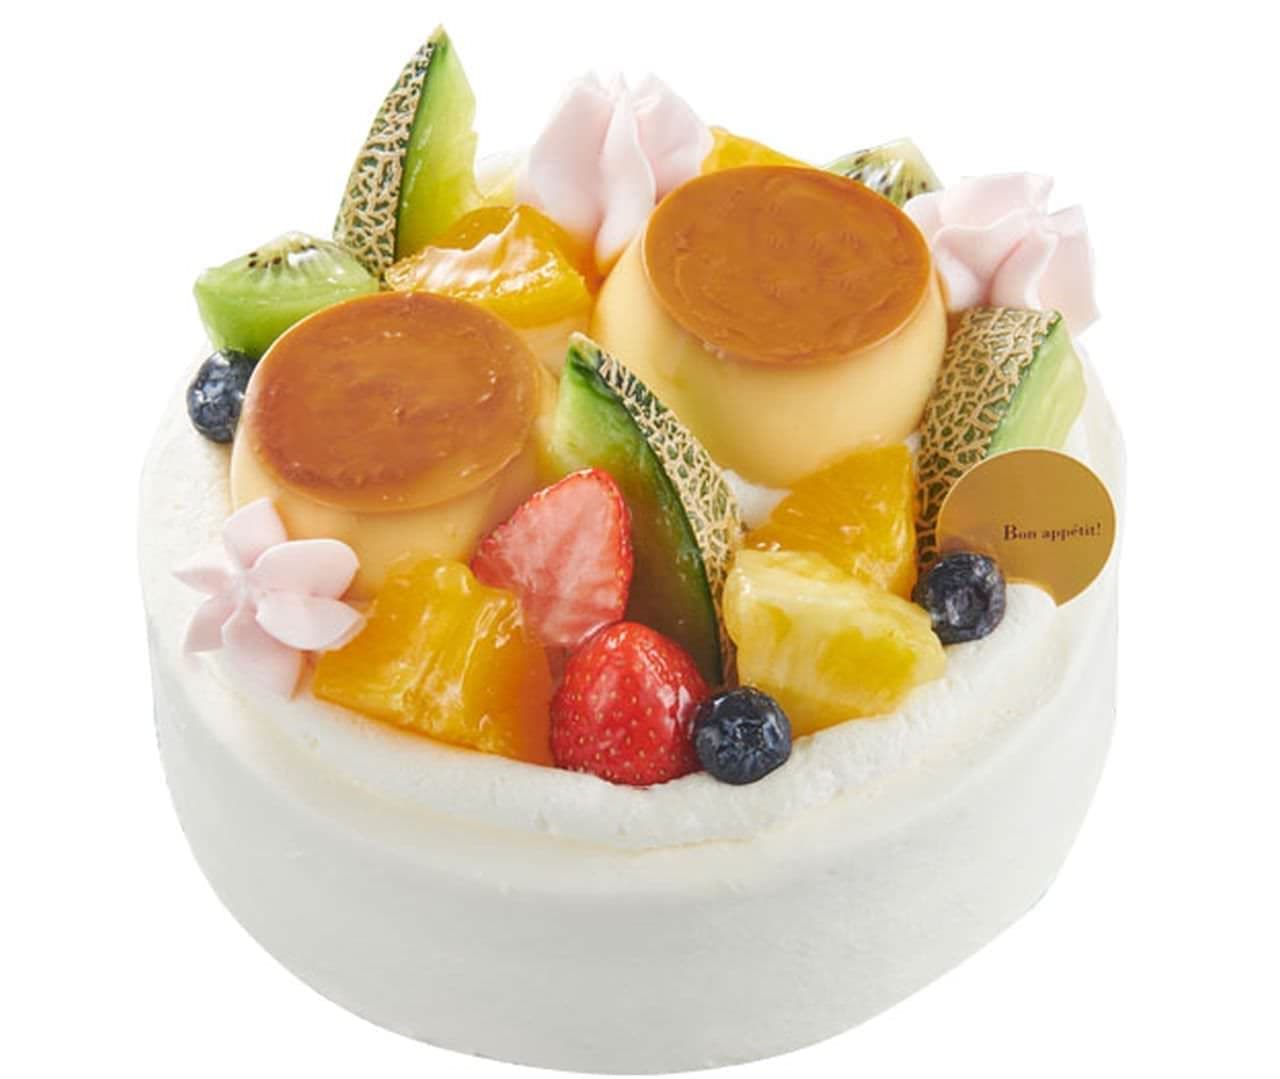 Chateraise "Pudding and Fruit Decoration"